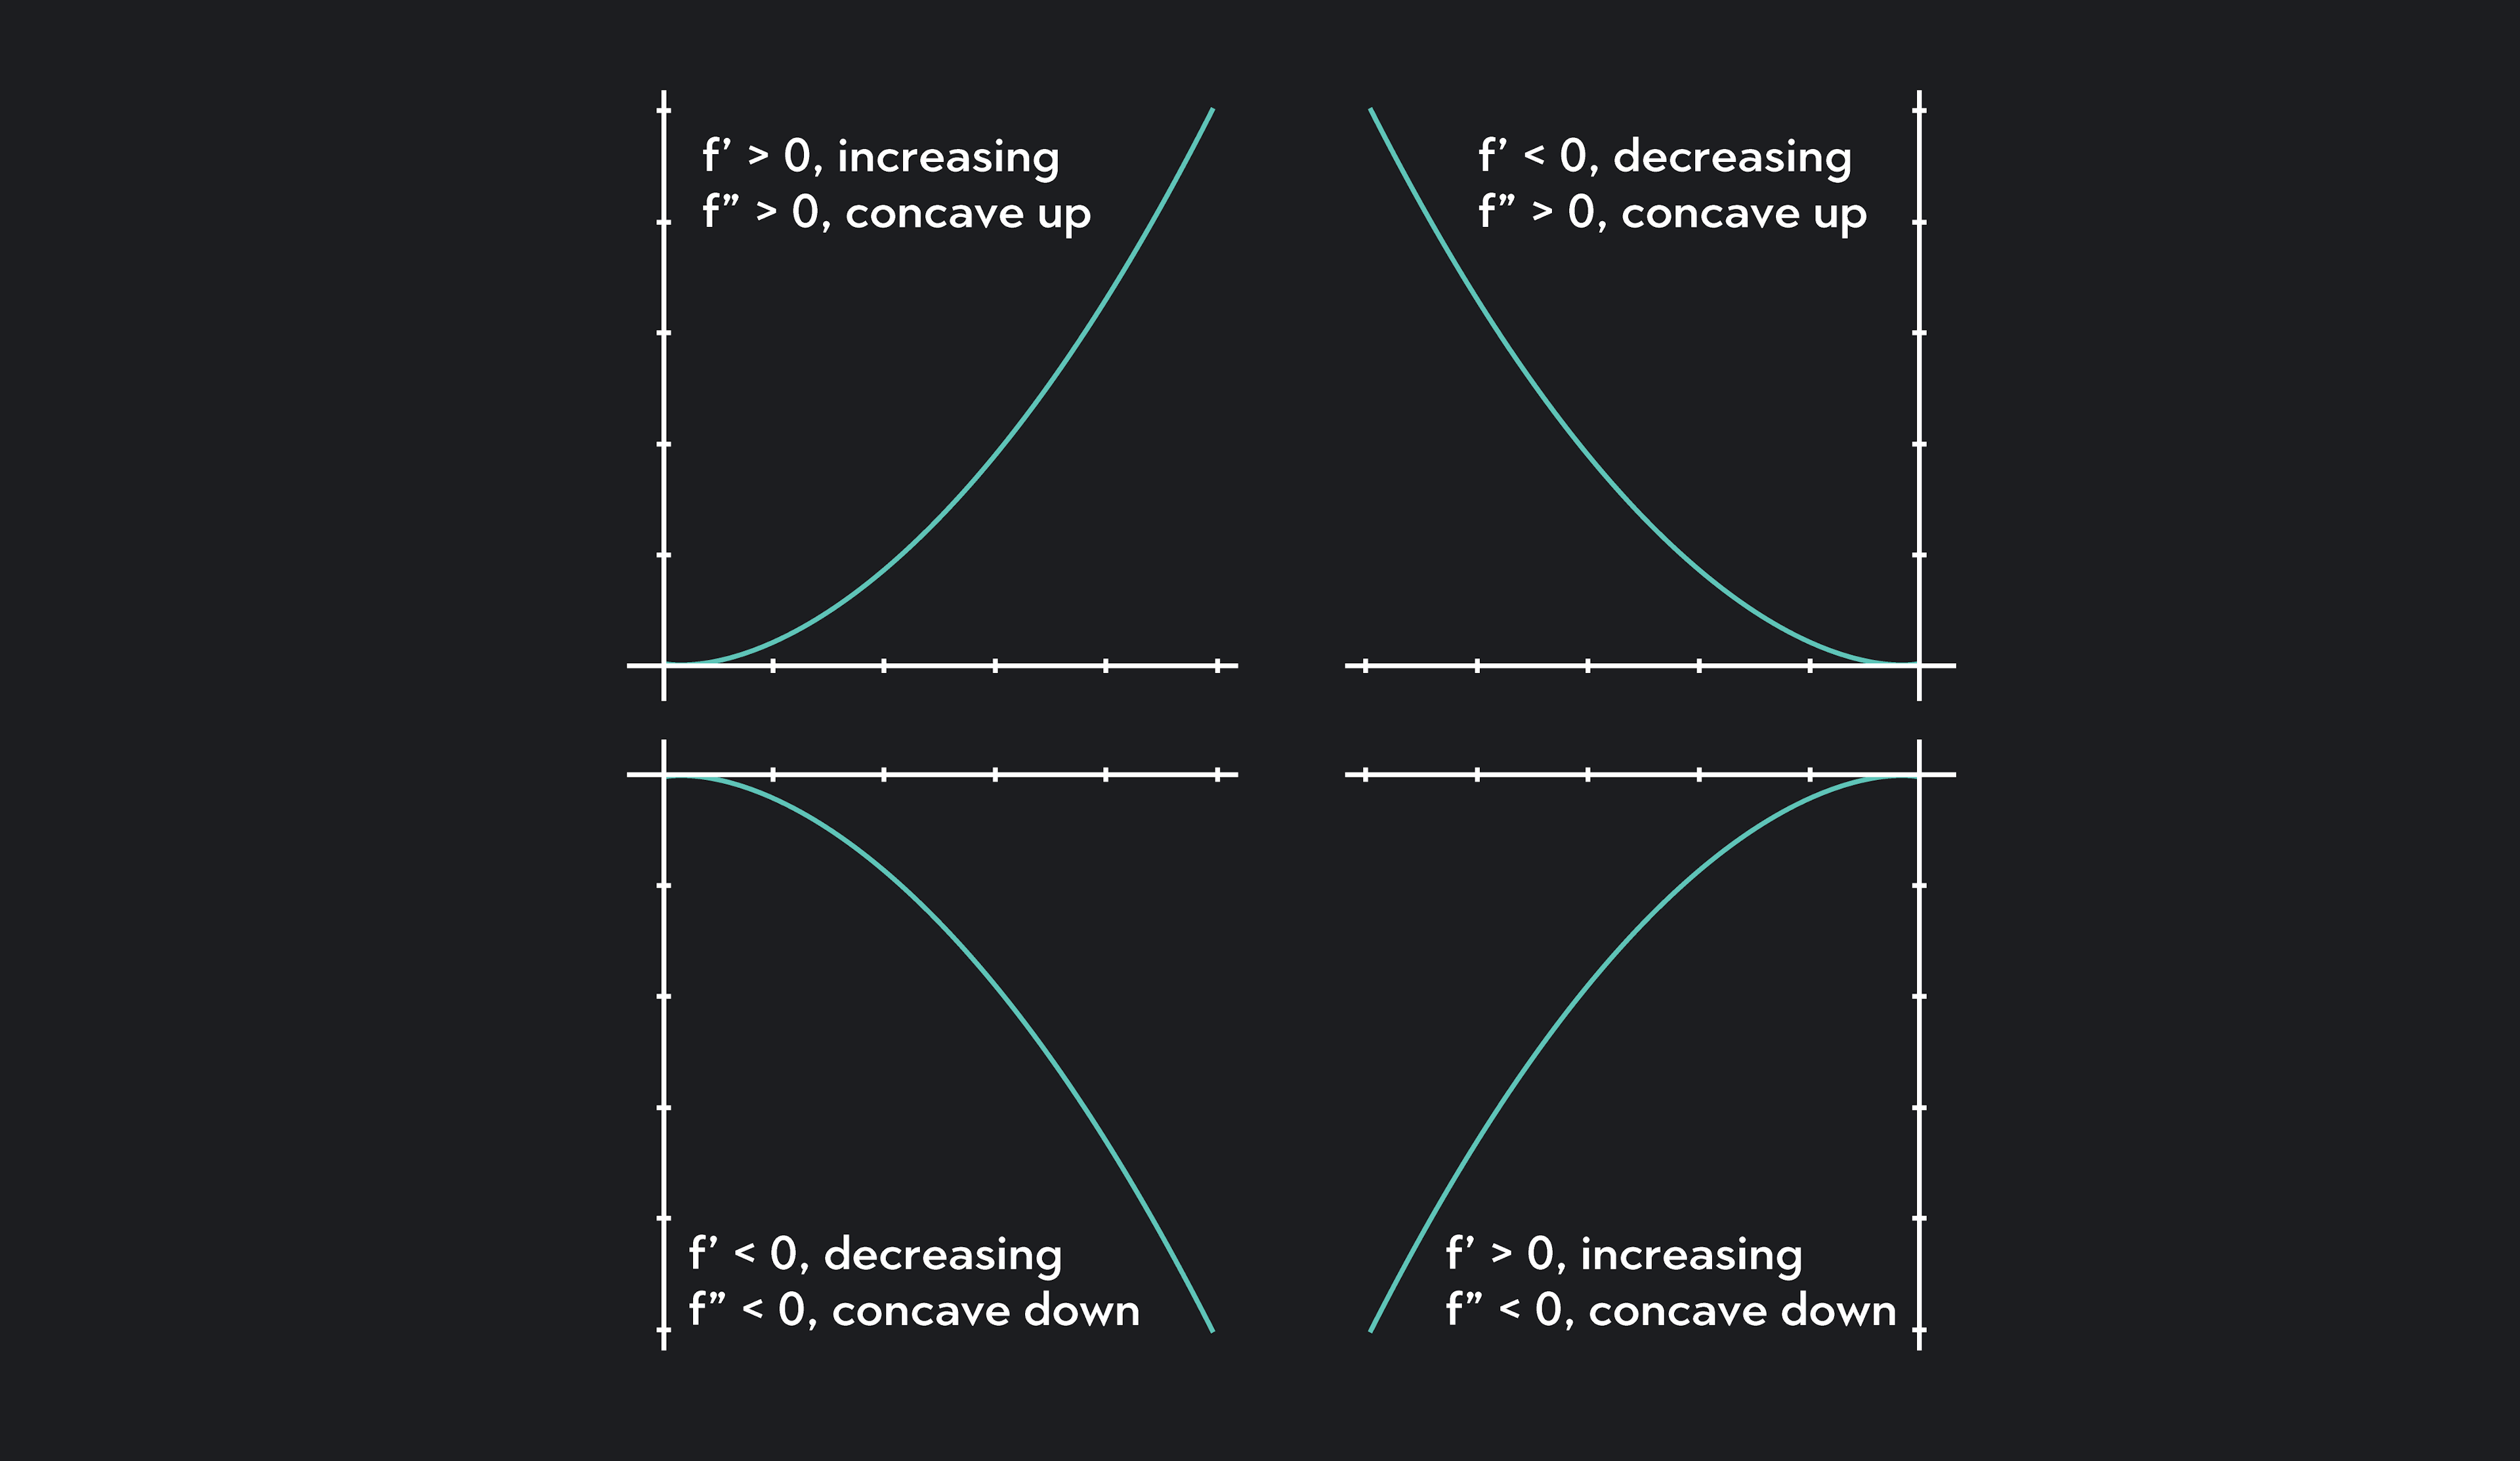 Graph showing that a concave up interval and a concave down interval can contain both increasing and/or decreasing intervals